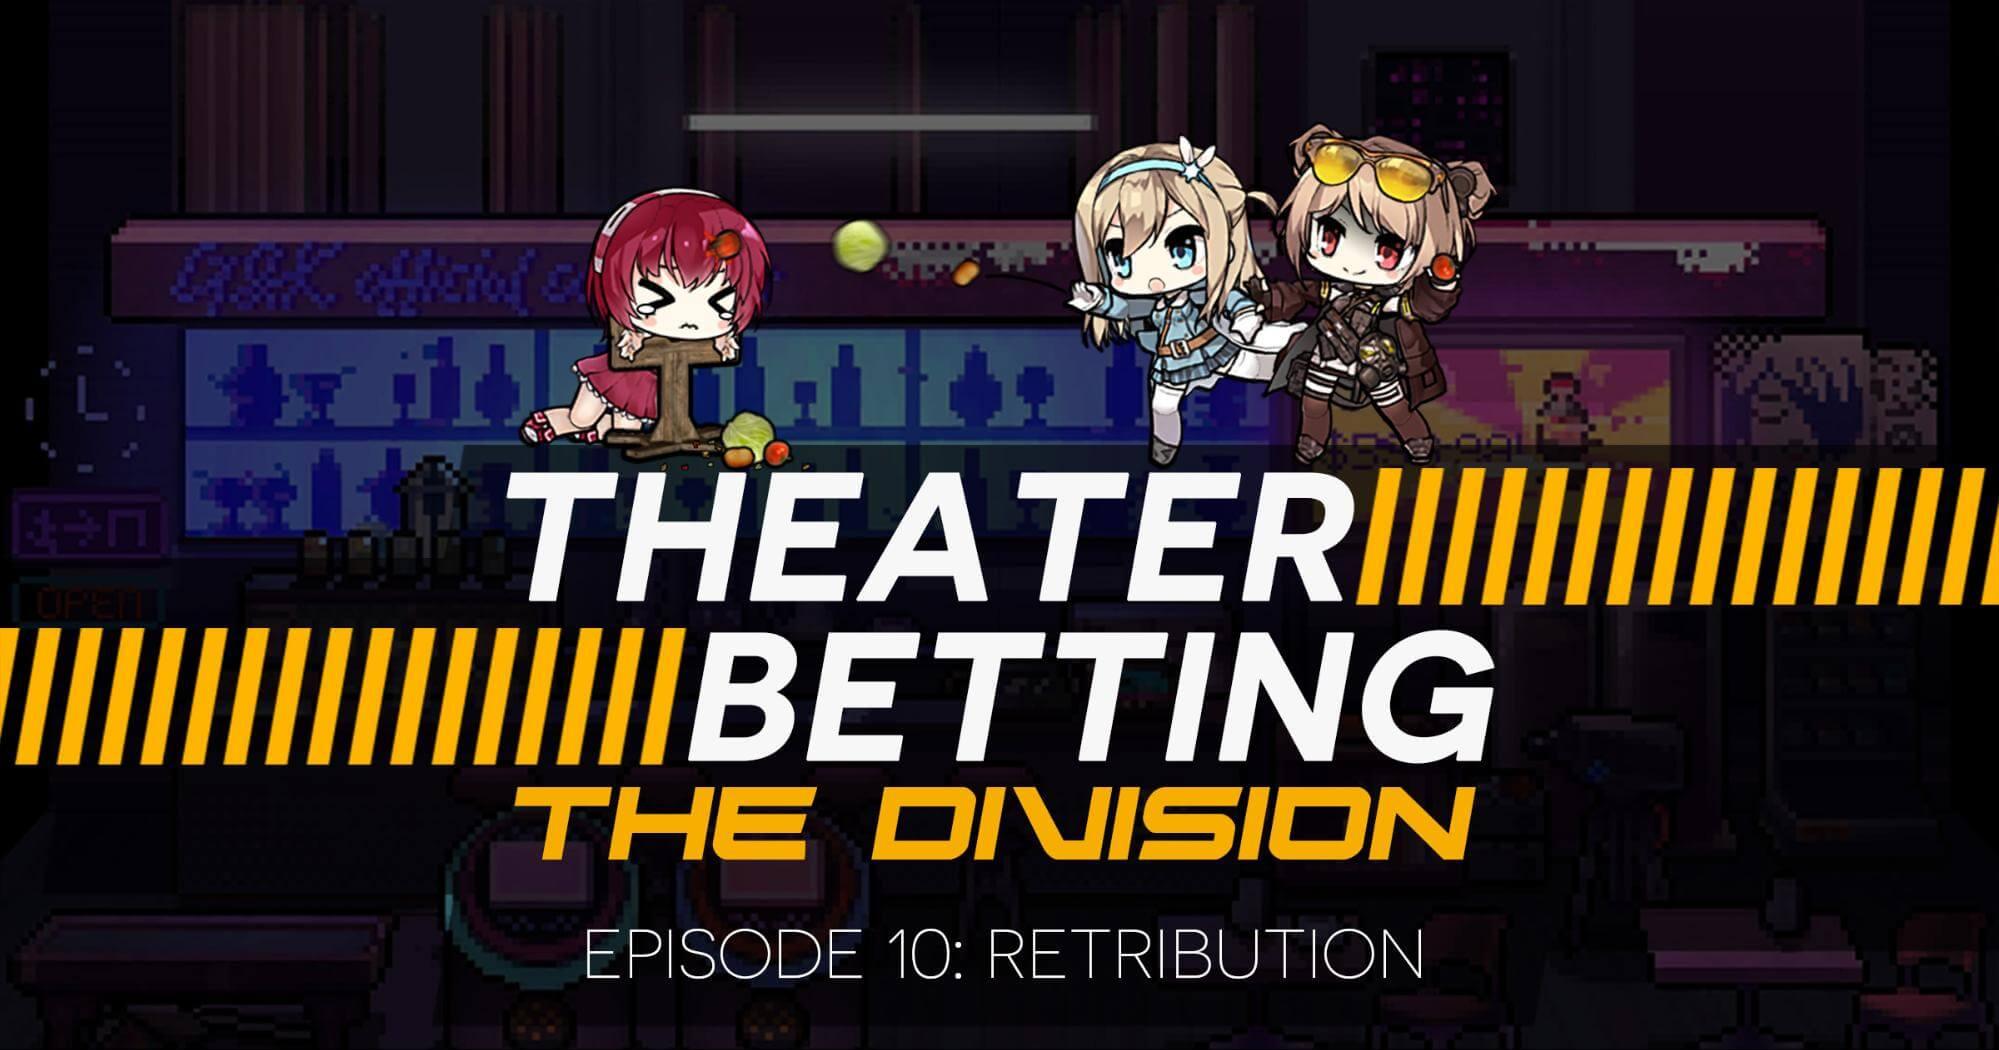 The Brekkie bullying continues in this short episode of Theater Betting Panel